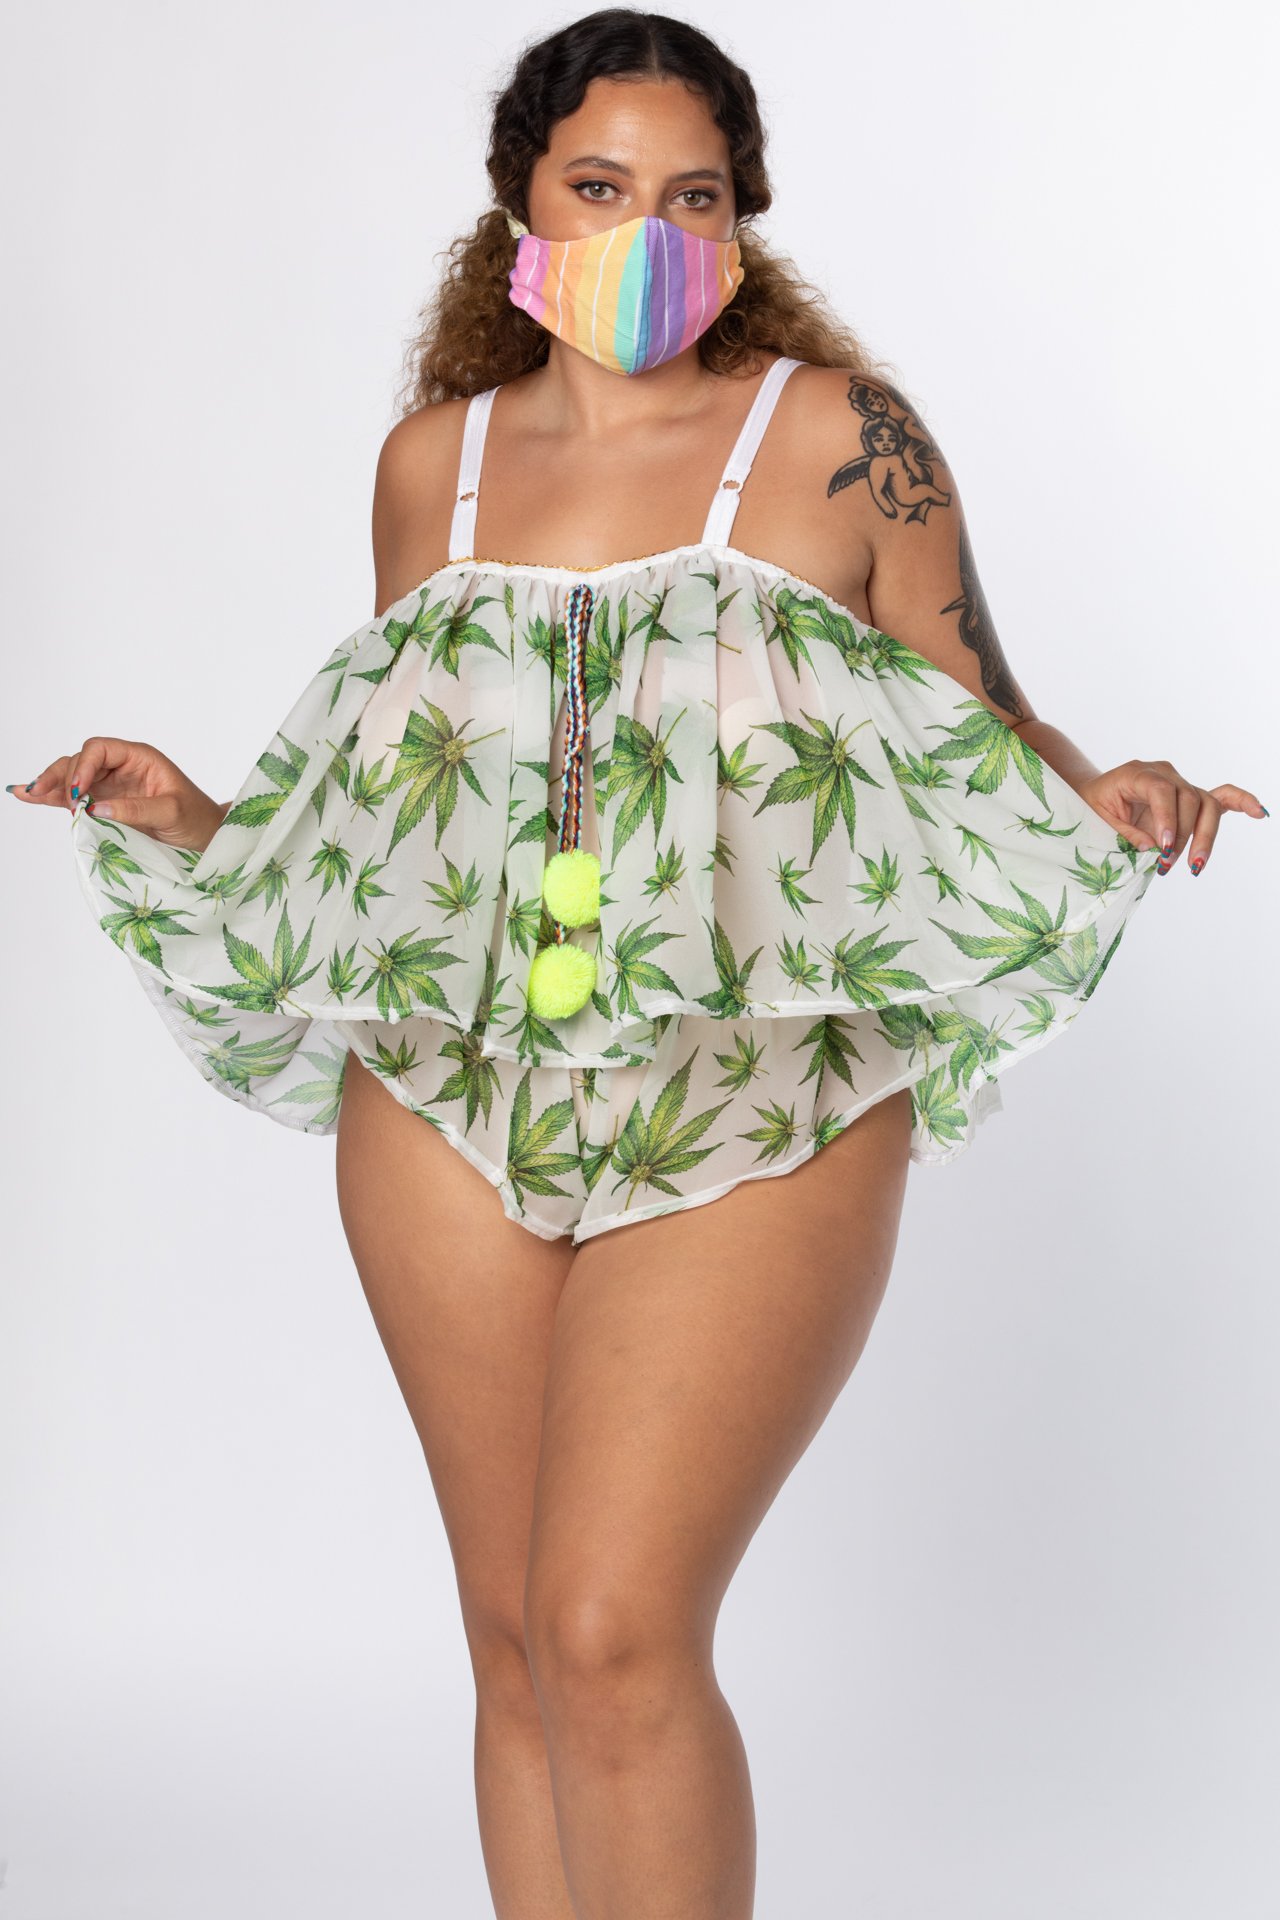 Solstice Intimates "Electric Lettuce" print features an Instagram-friendly cannabis design